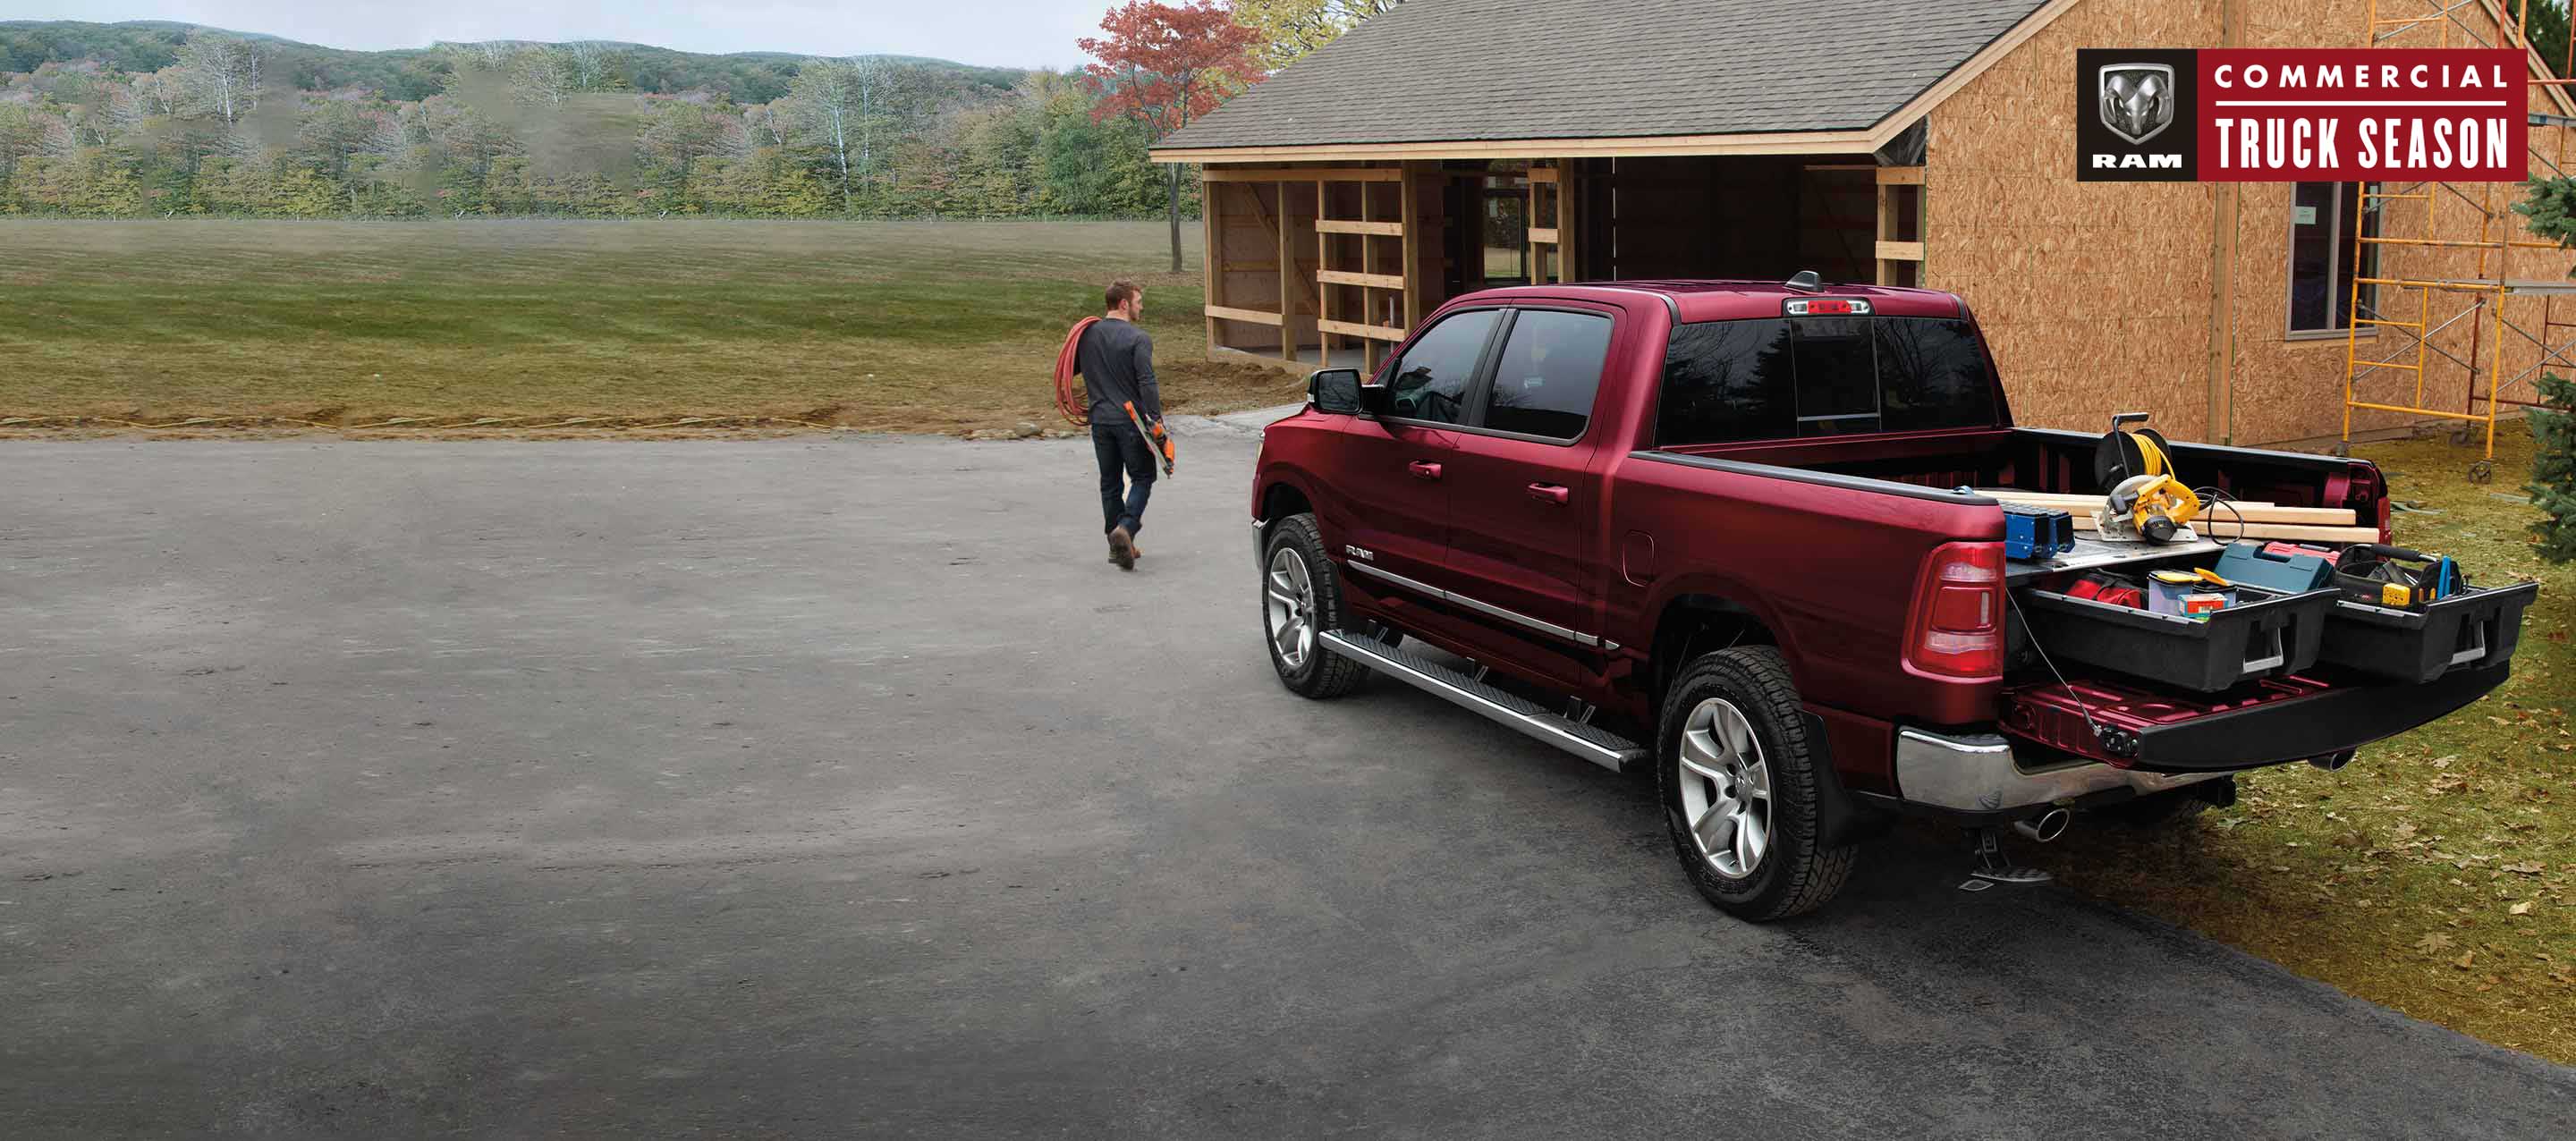 A red 2022 Ram 1500 Big Horn Crew Cab 4x4 with its tailgate open and its truck bed filled with tools, parked at a home under construction. Ram Commercial Truck Season.